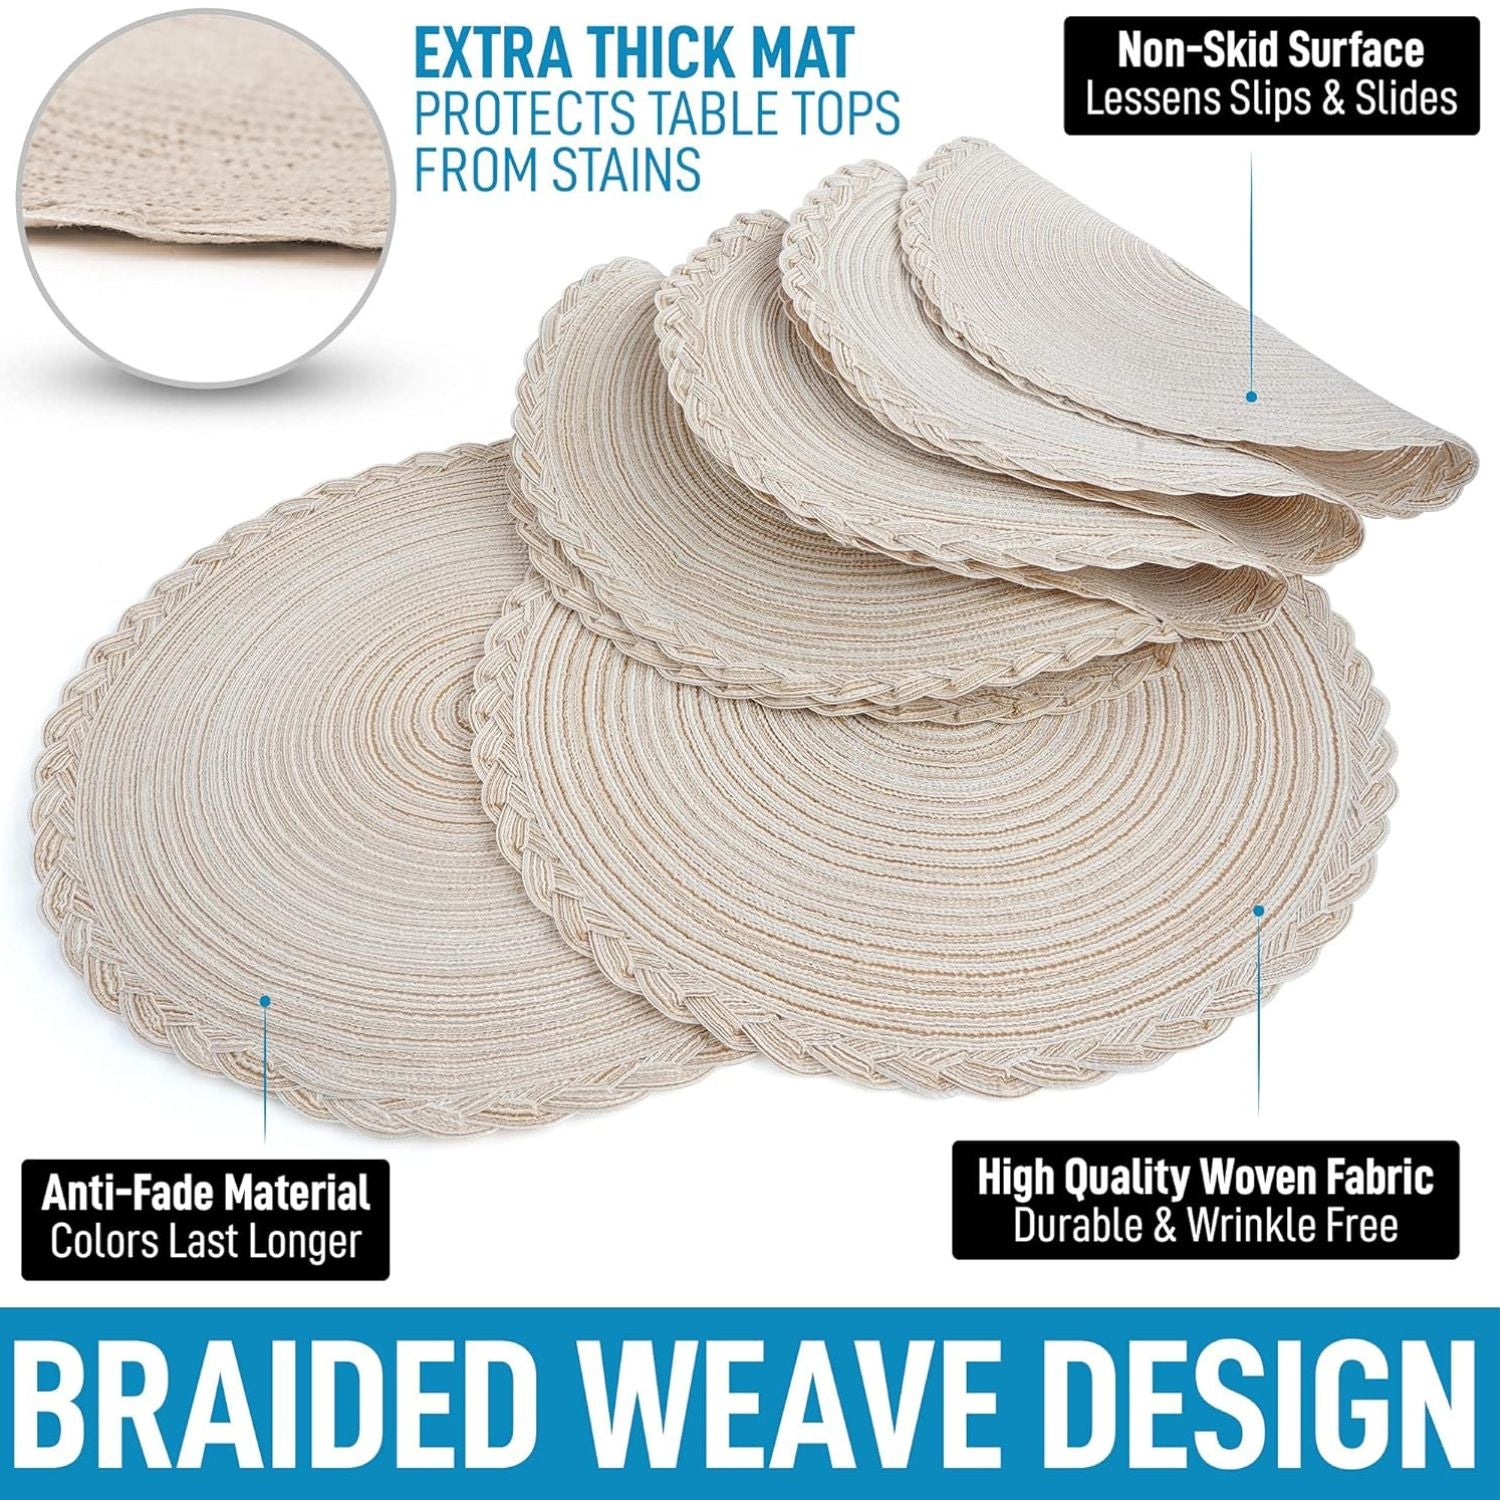 Round Braided Placemats - Set of 6